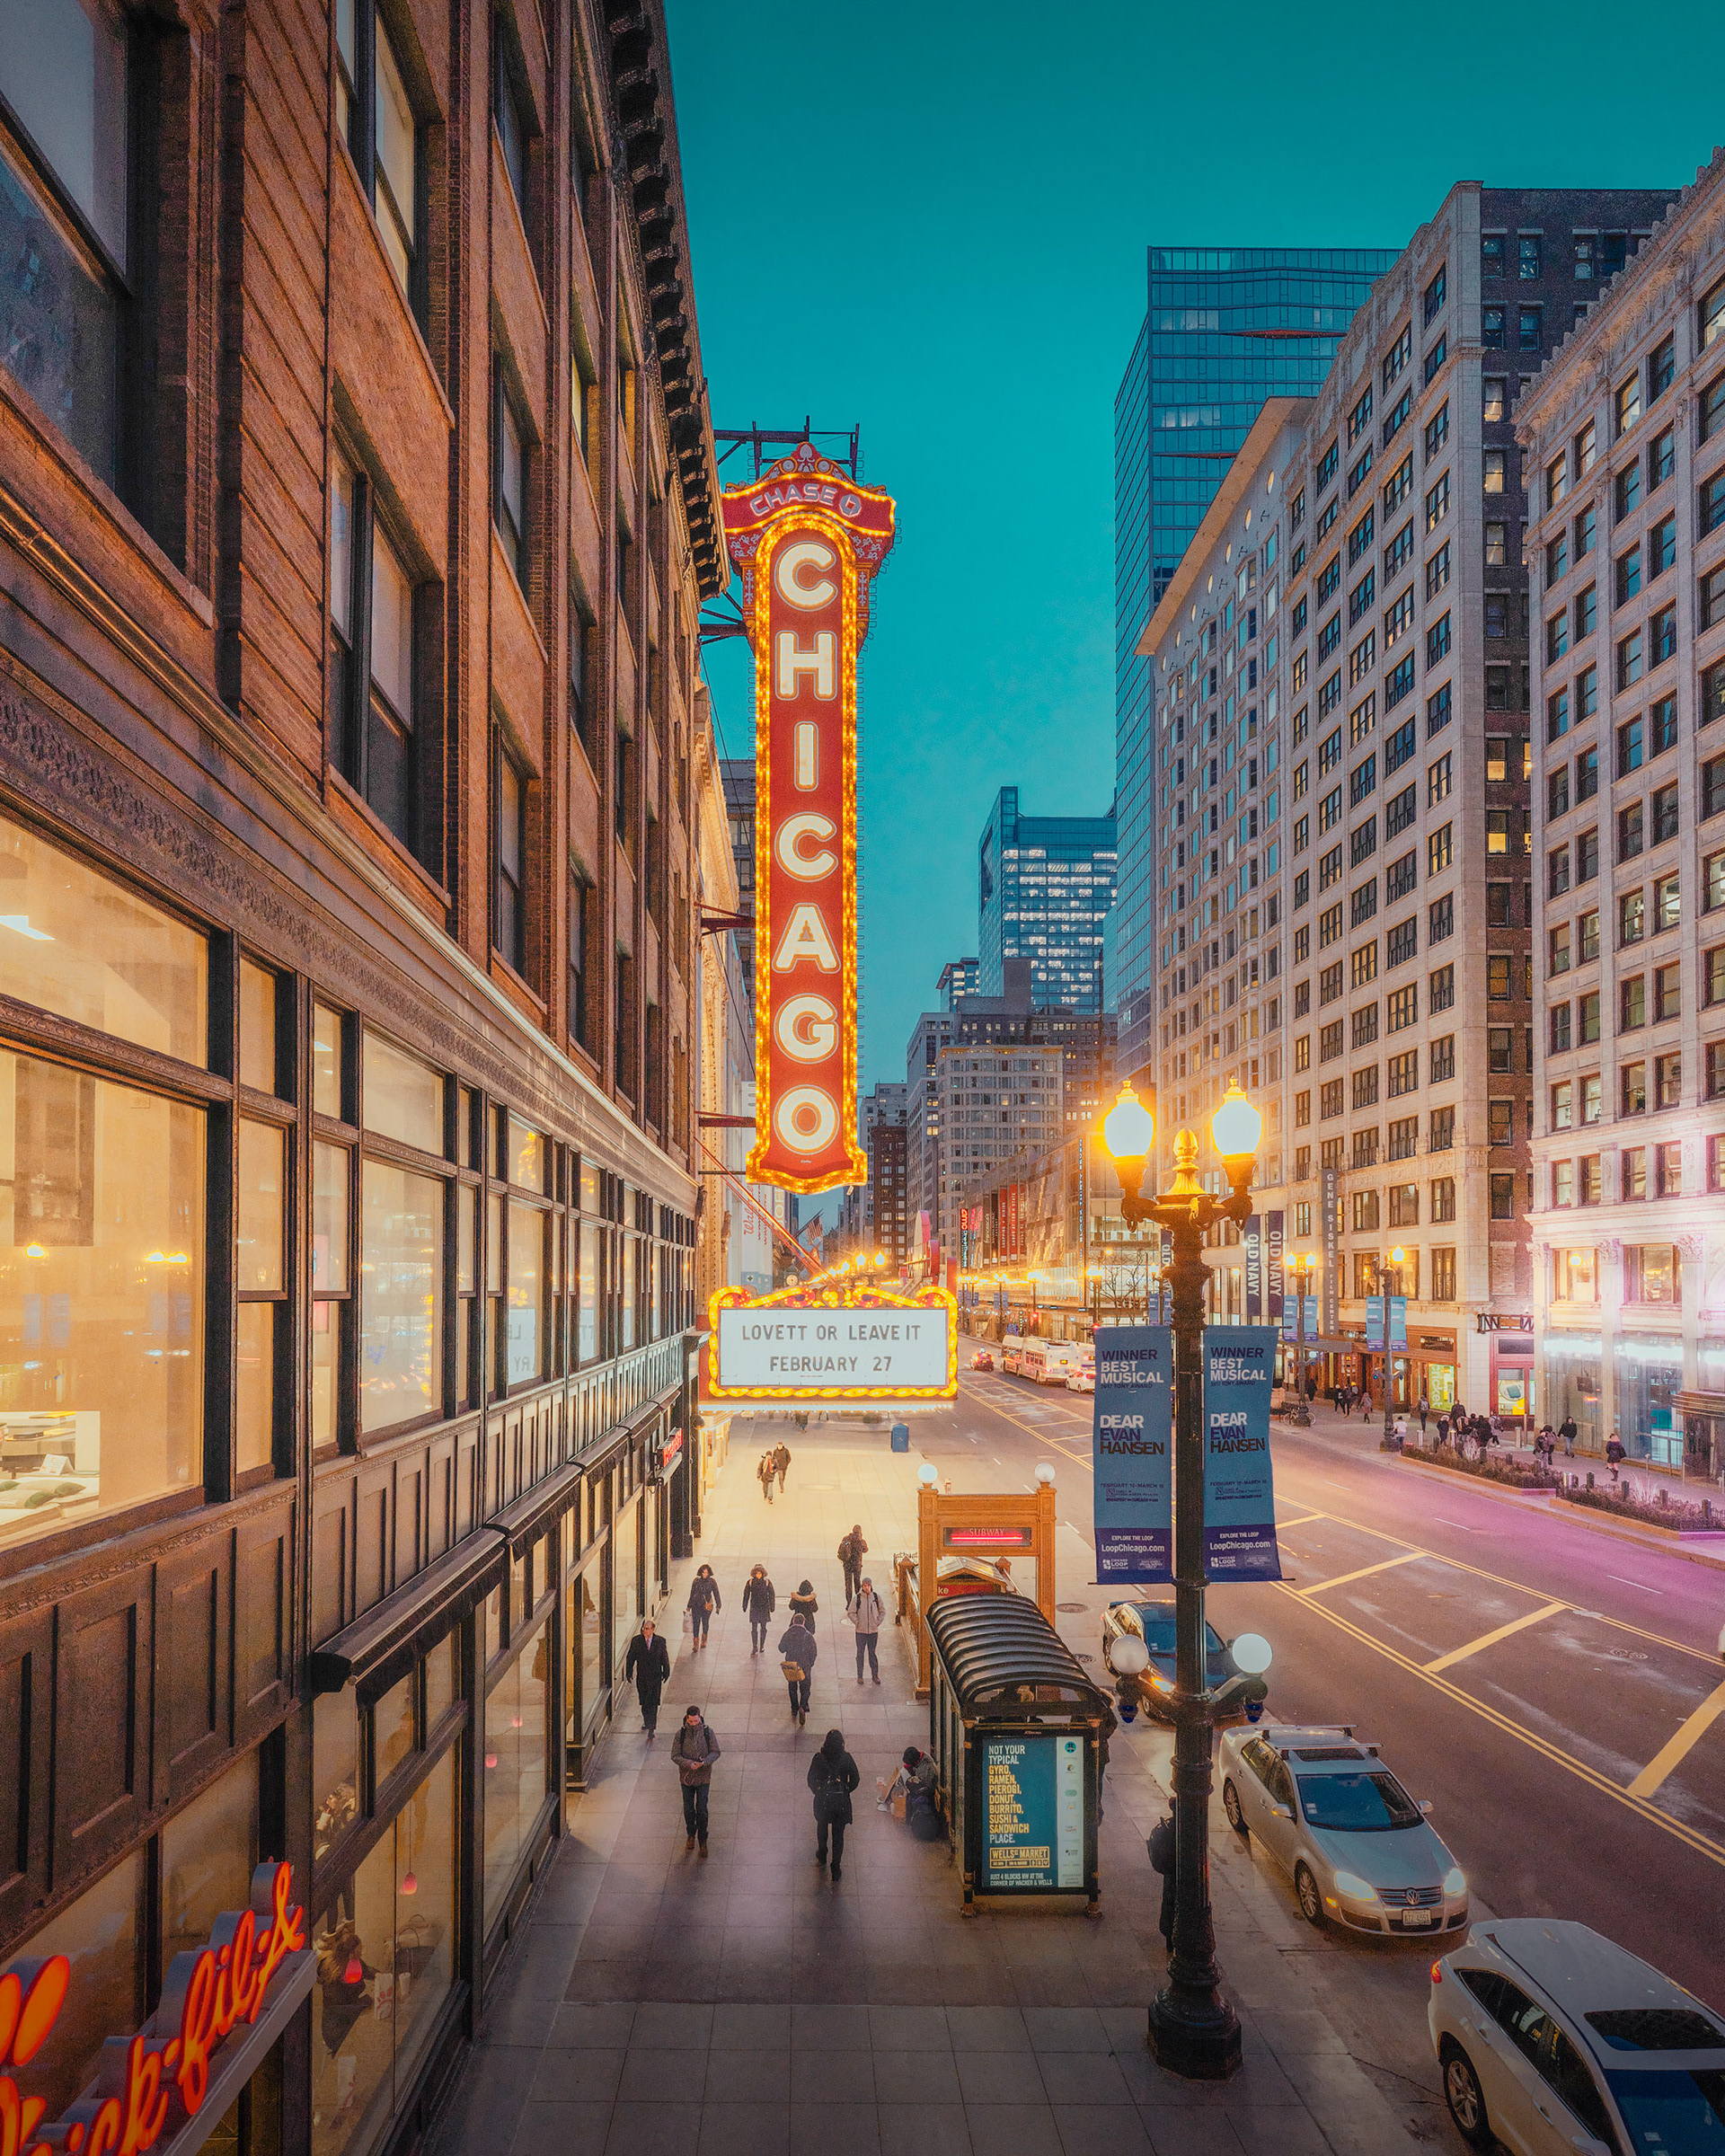 Ludwig Favre Reveals the Beauty of Chicago in a Nostalgic Series